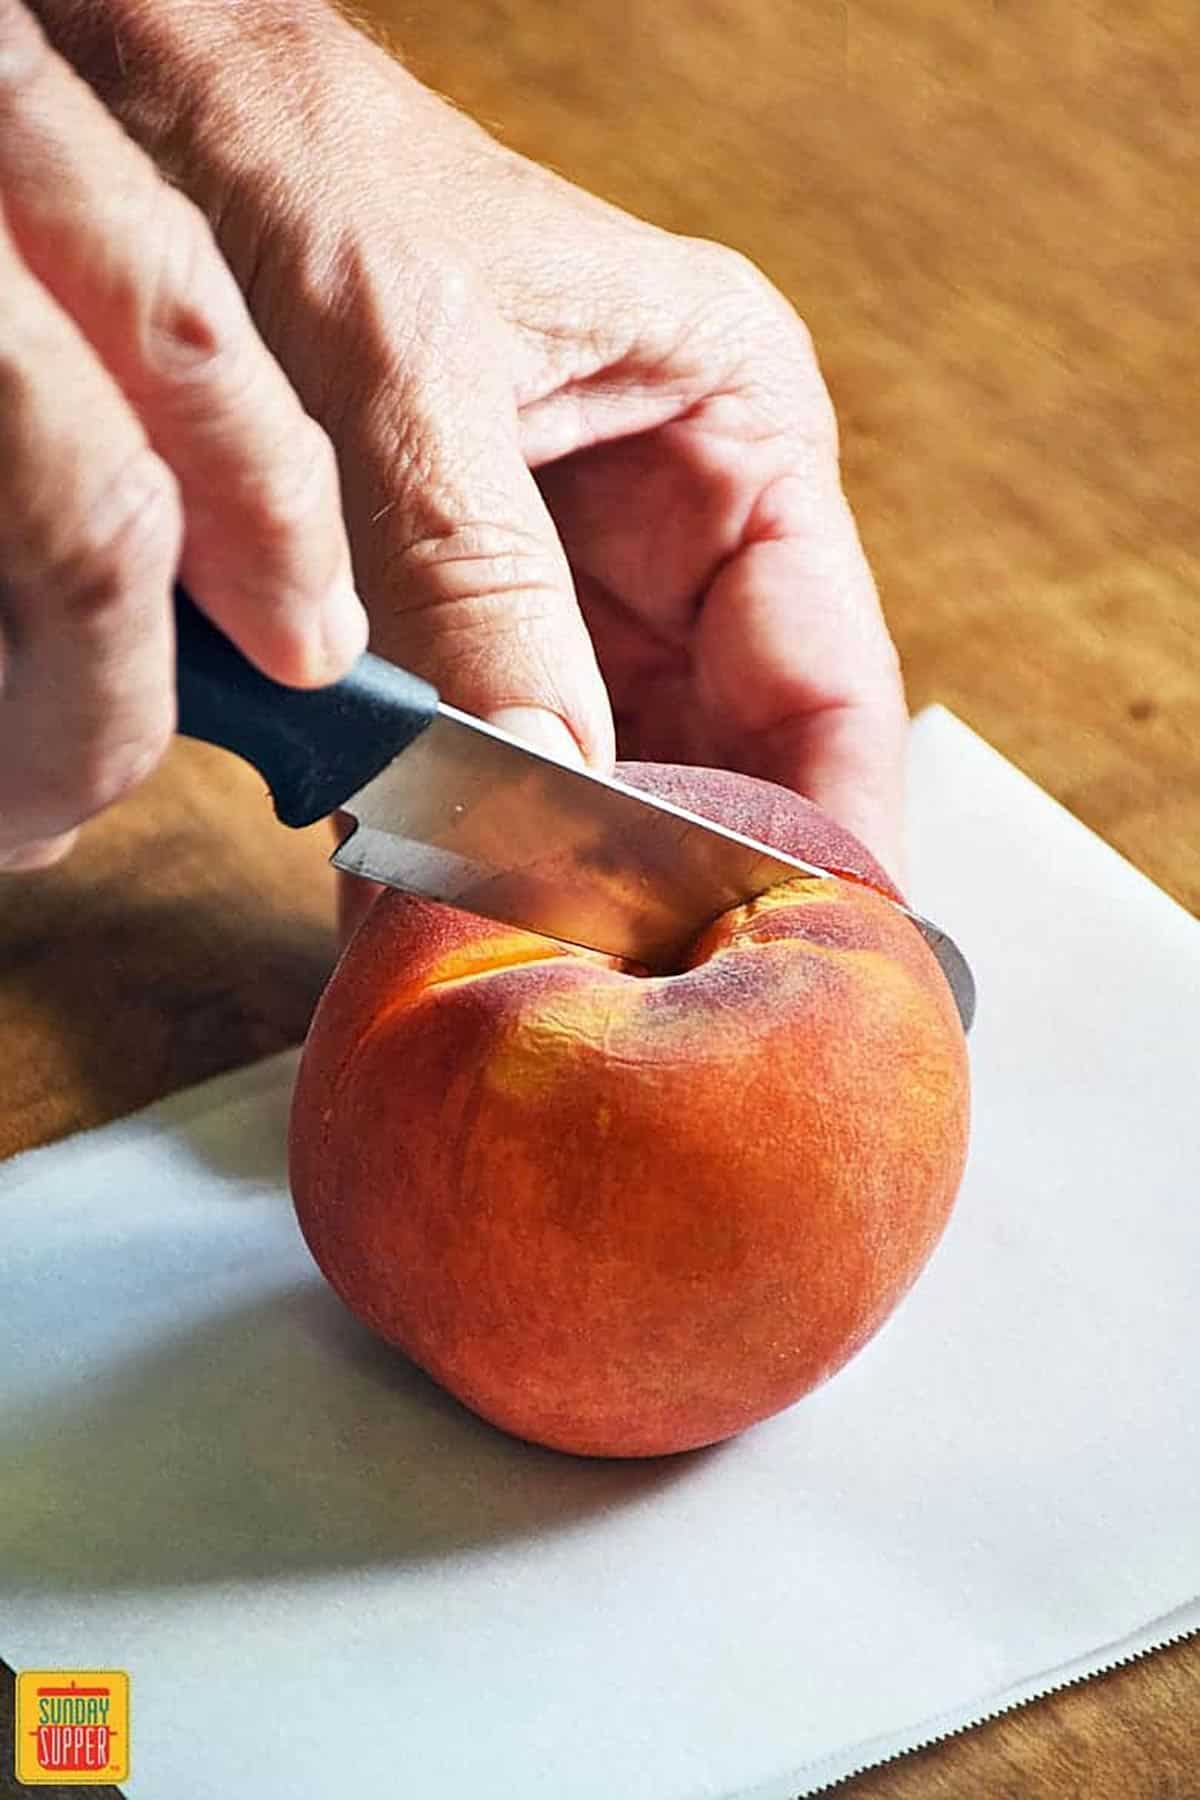 How To Cut Peaches Step By Step Sunday Supper Movement,Mimosa Bar Recipes